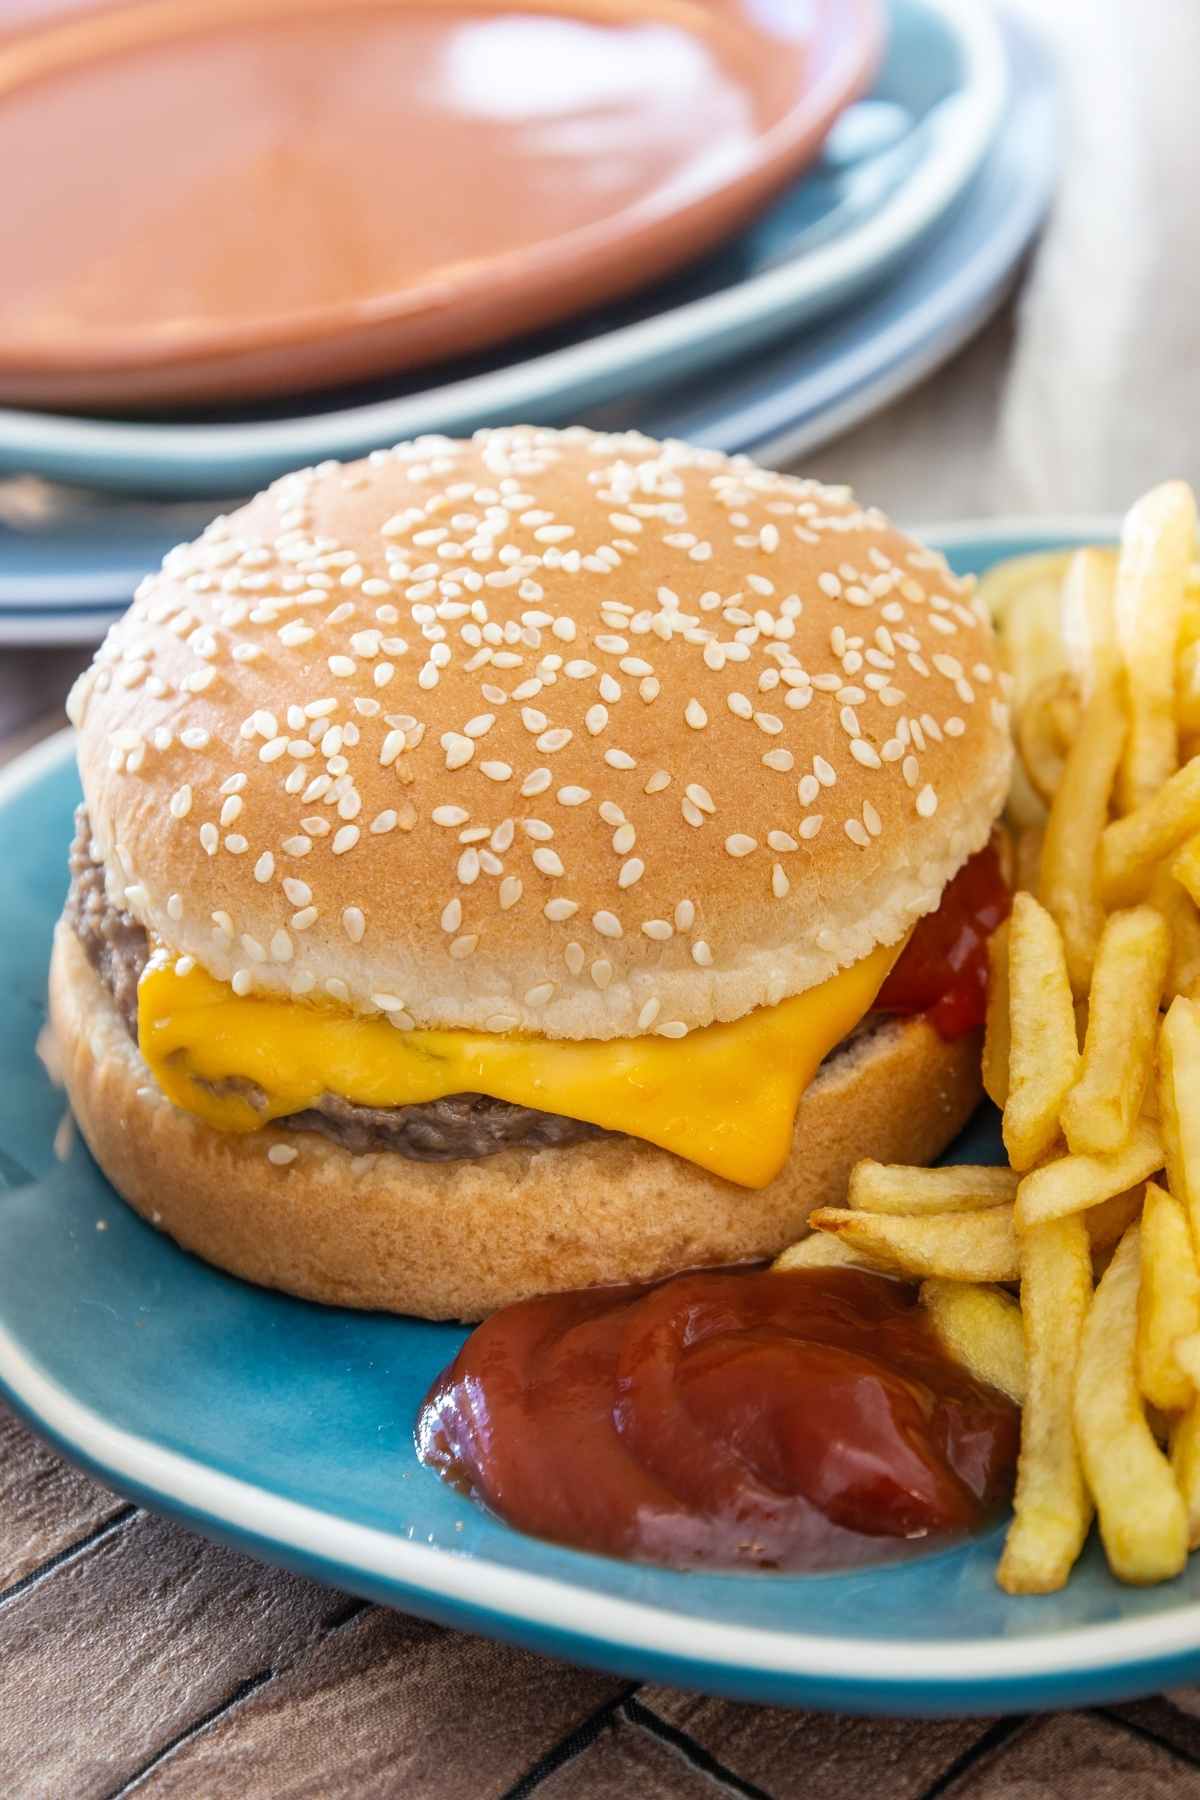 If you and your family enjoy the cheeseburgers at McDonald’s, this homemade copycat recipe is just what you need! It’s better than the cheeseburgers at the golden arches!